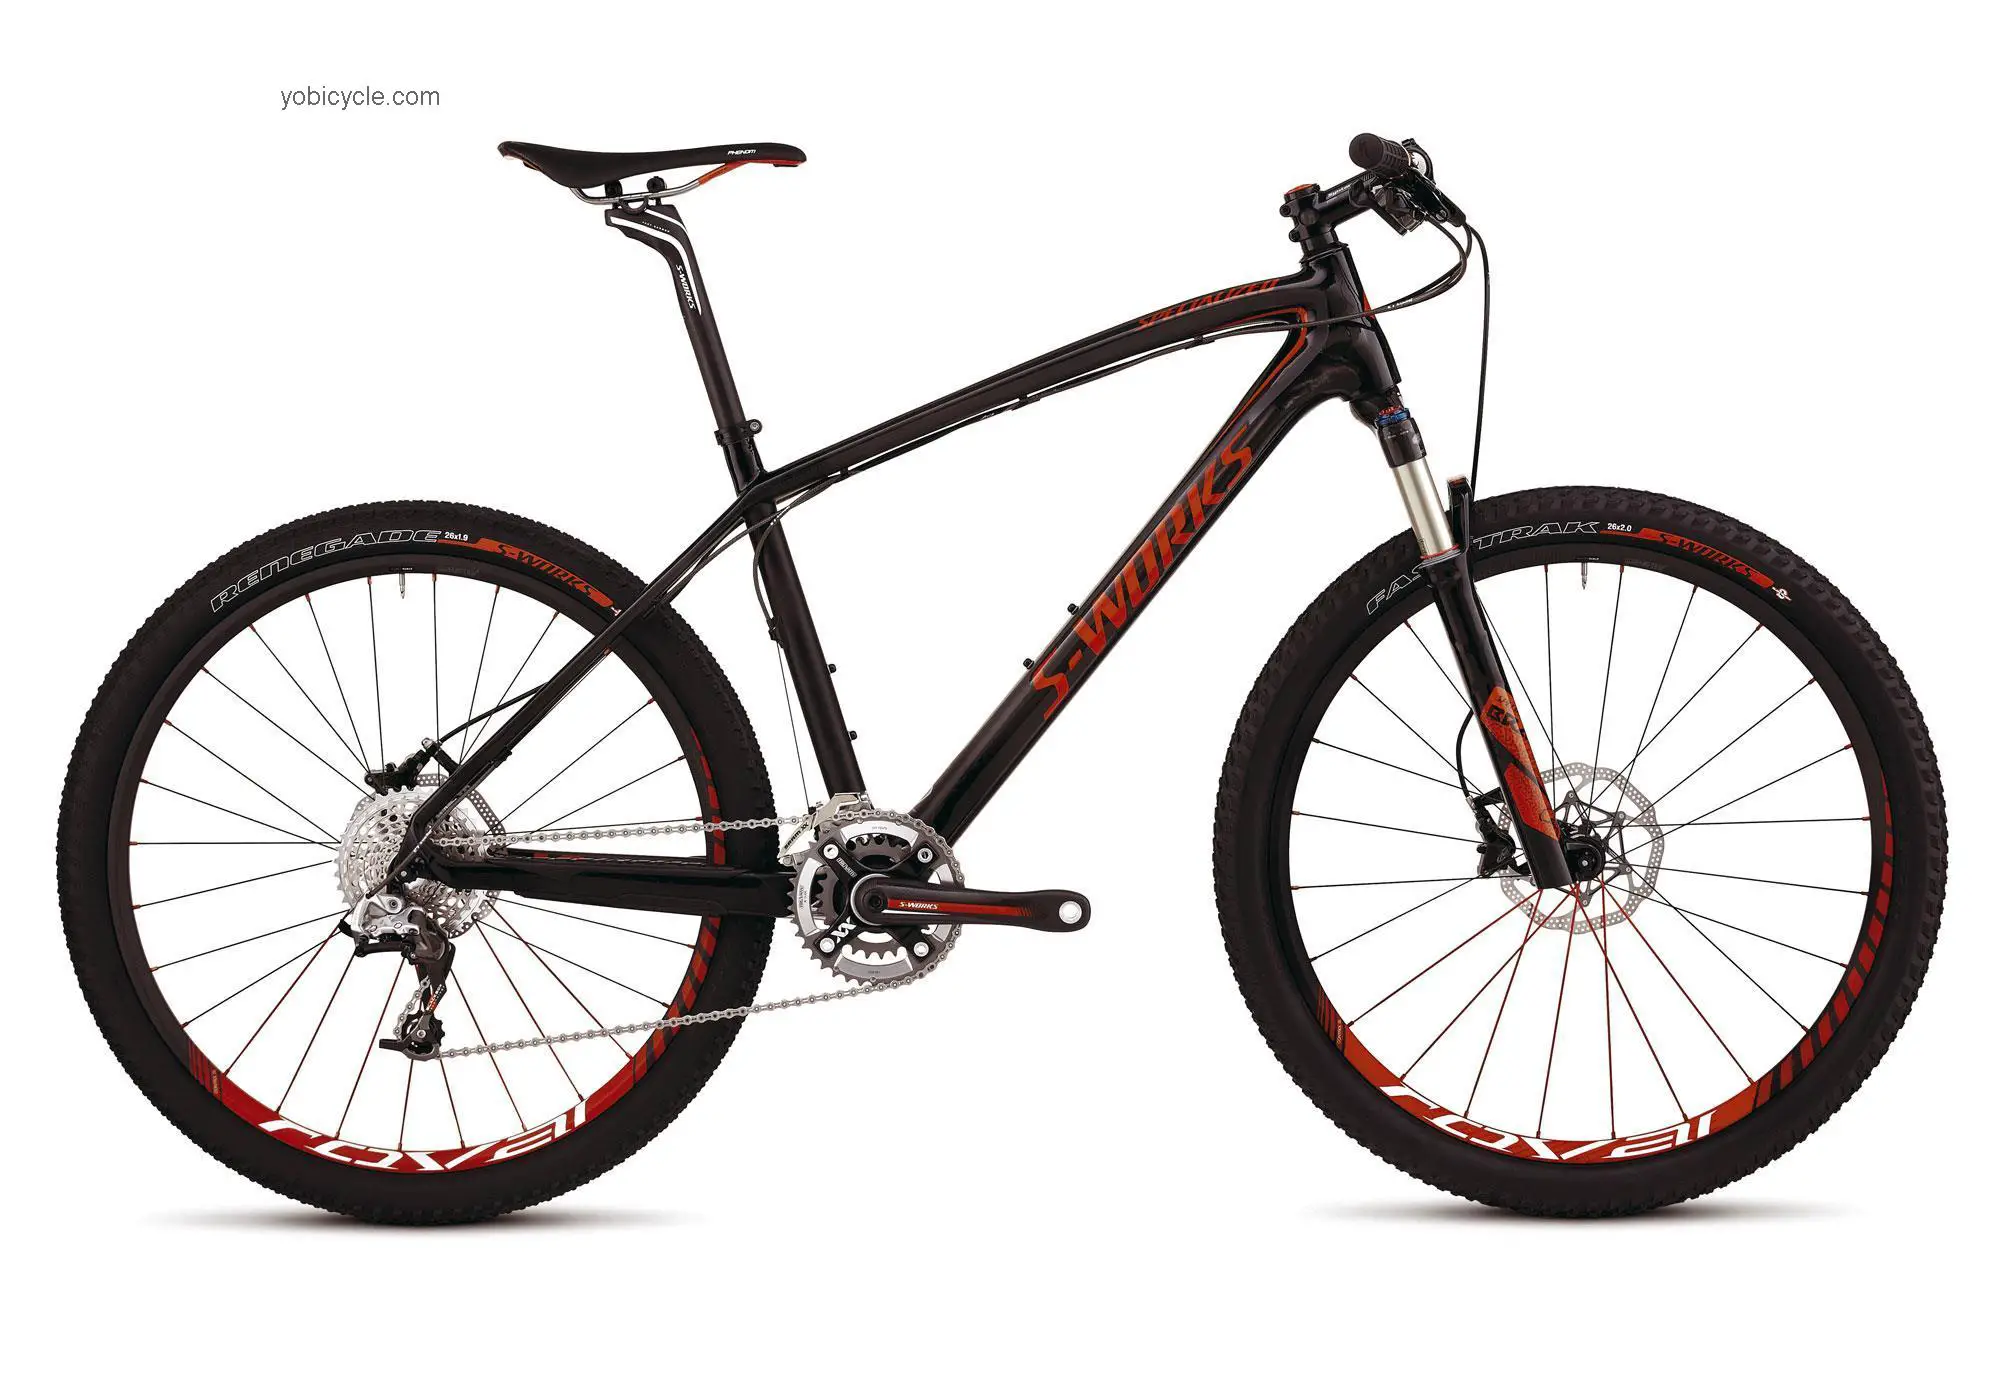 Specialized S-Works Stumpjumper HT Carbon 2012 comparison online with competitors